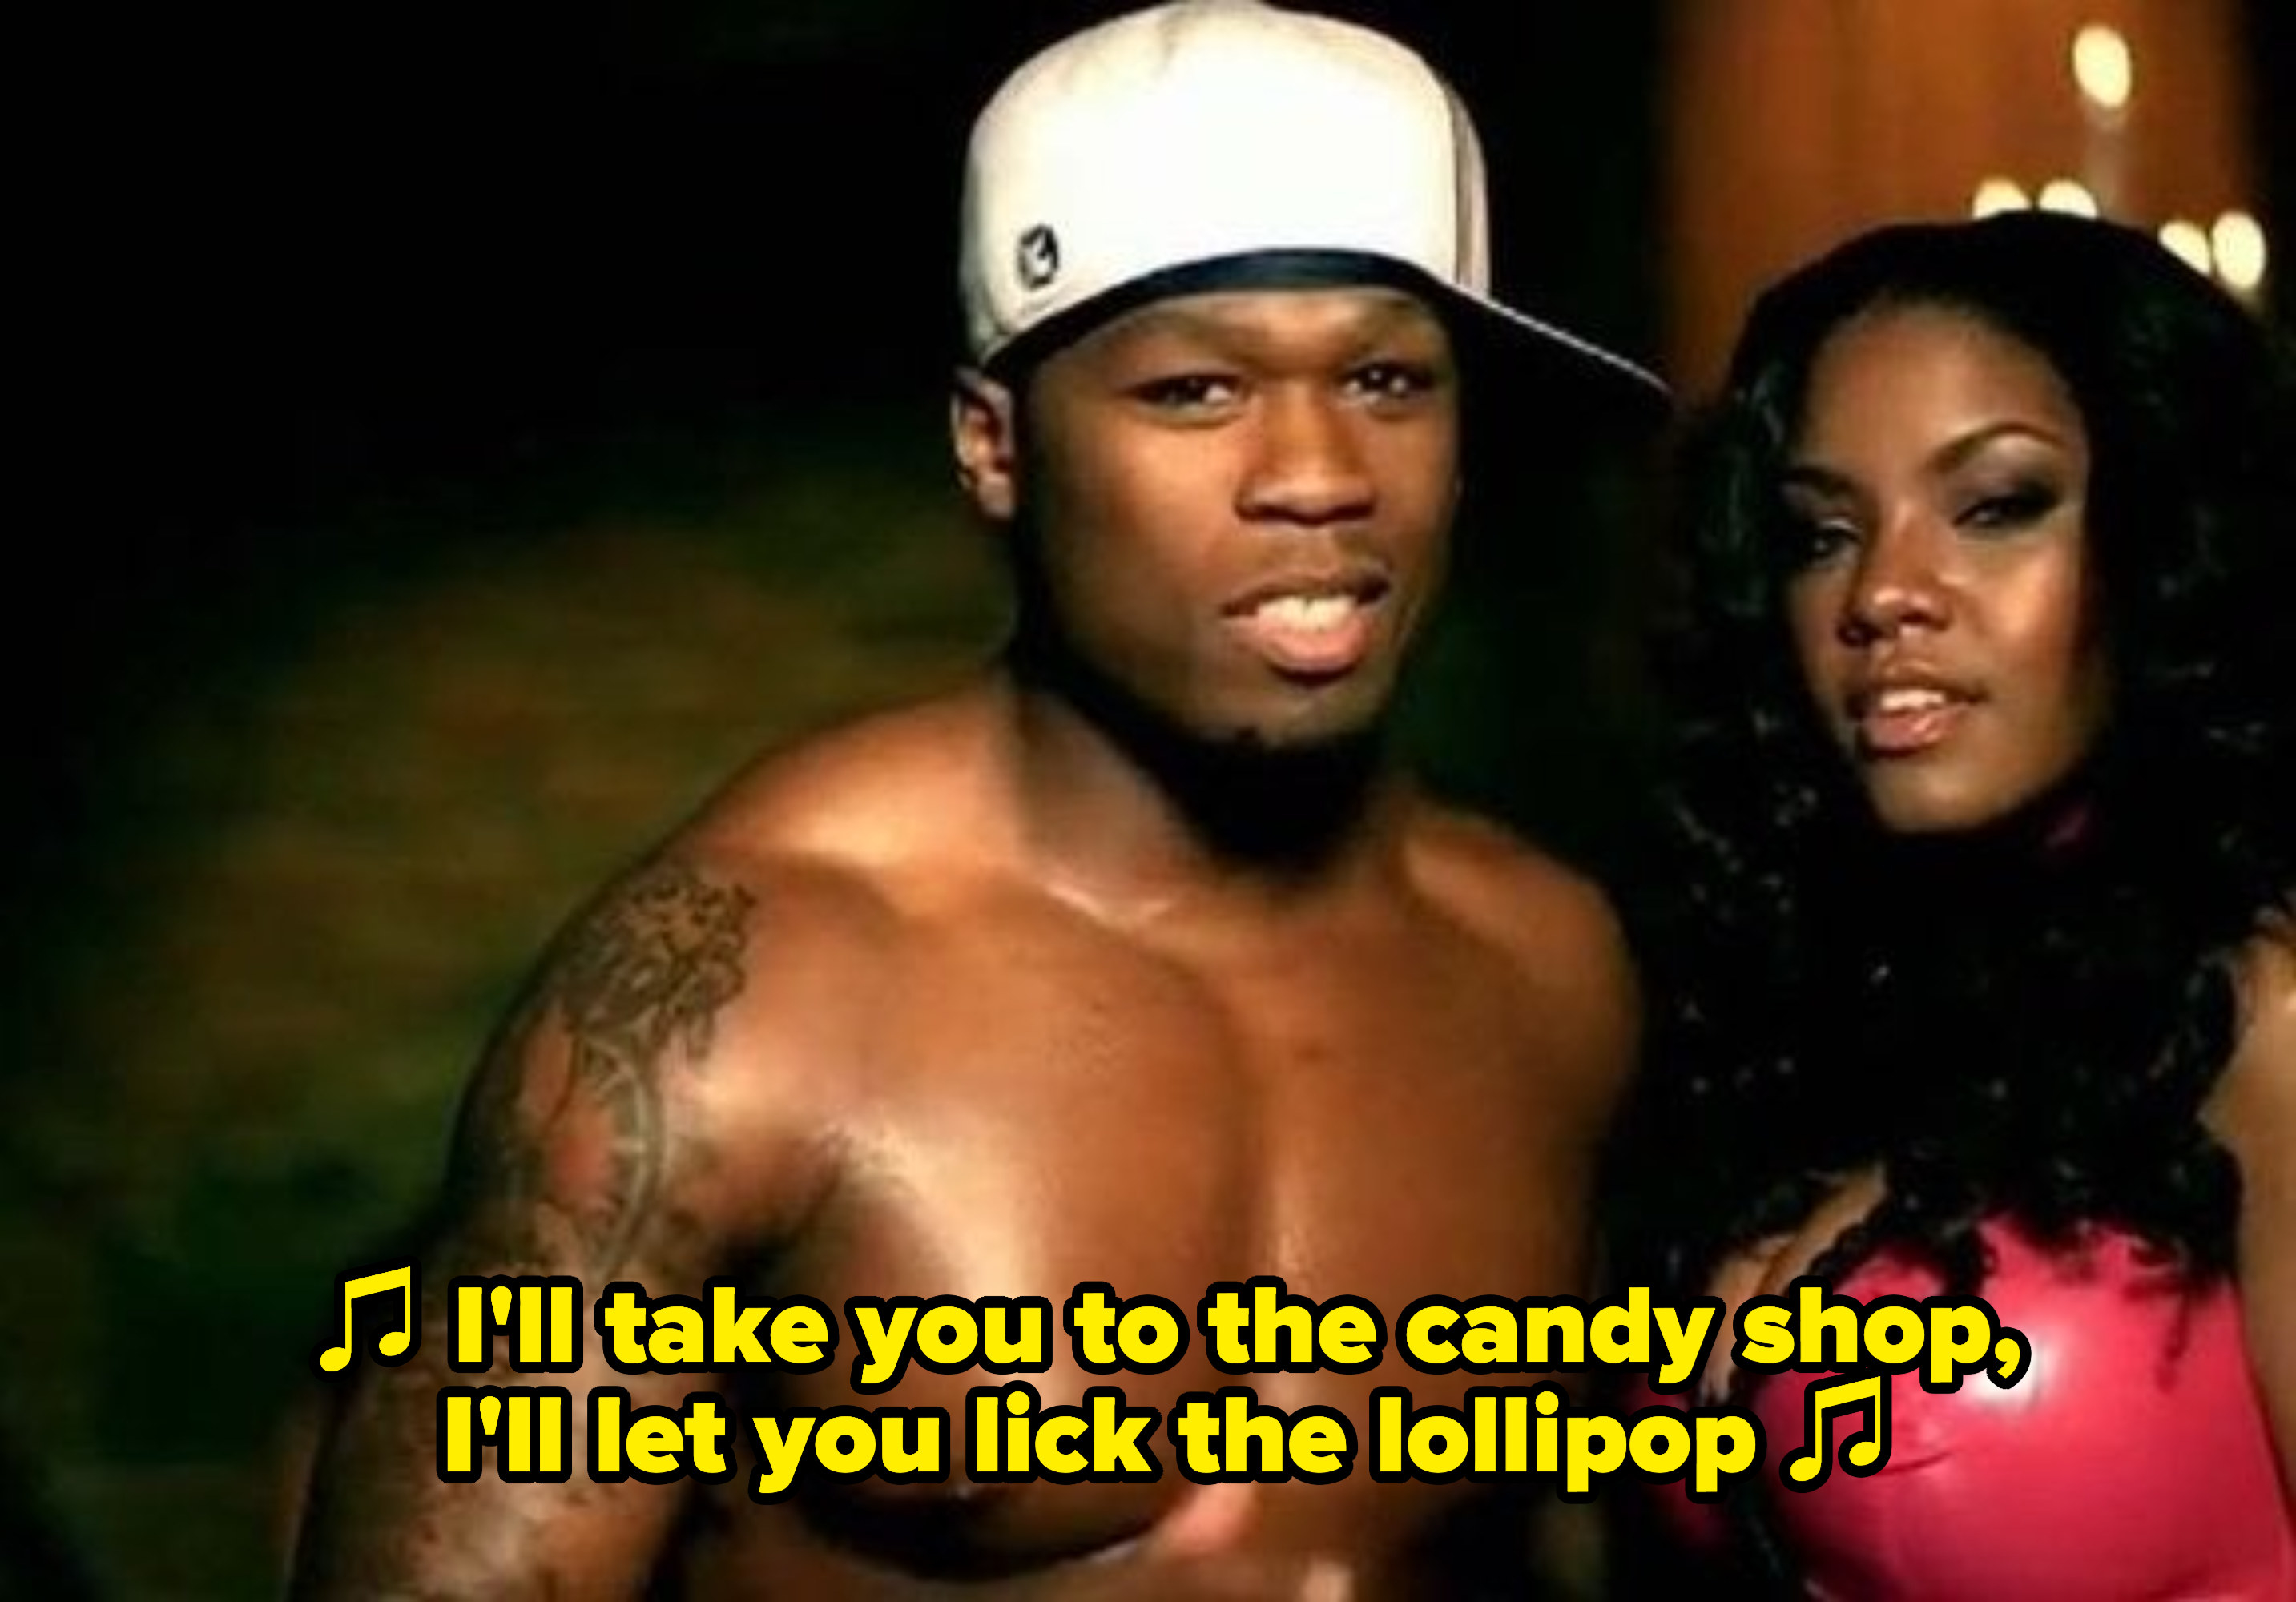 50 Cent rapping: &quot;I&#x27;ll take you to the candy shop, I&#x27;ll let you lick the lollipop&quot;